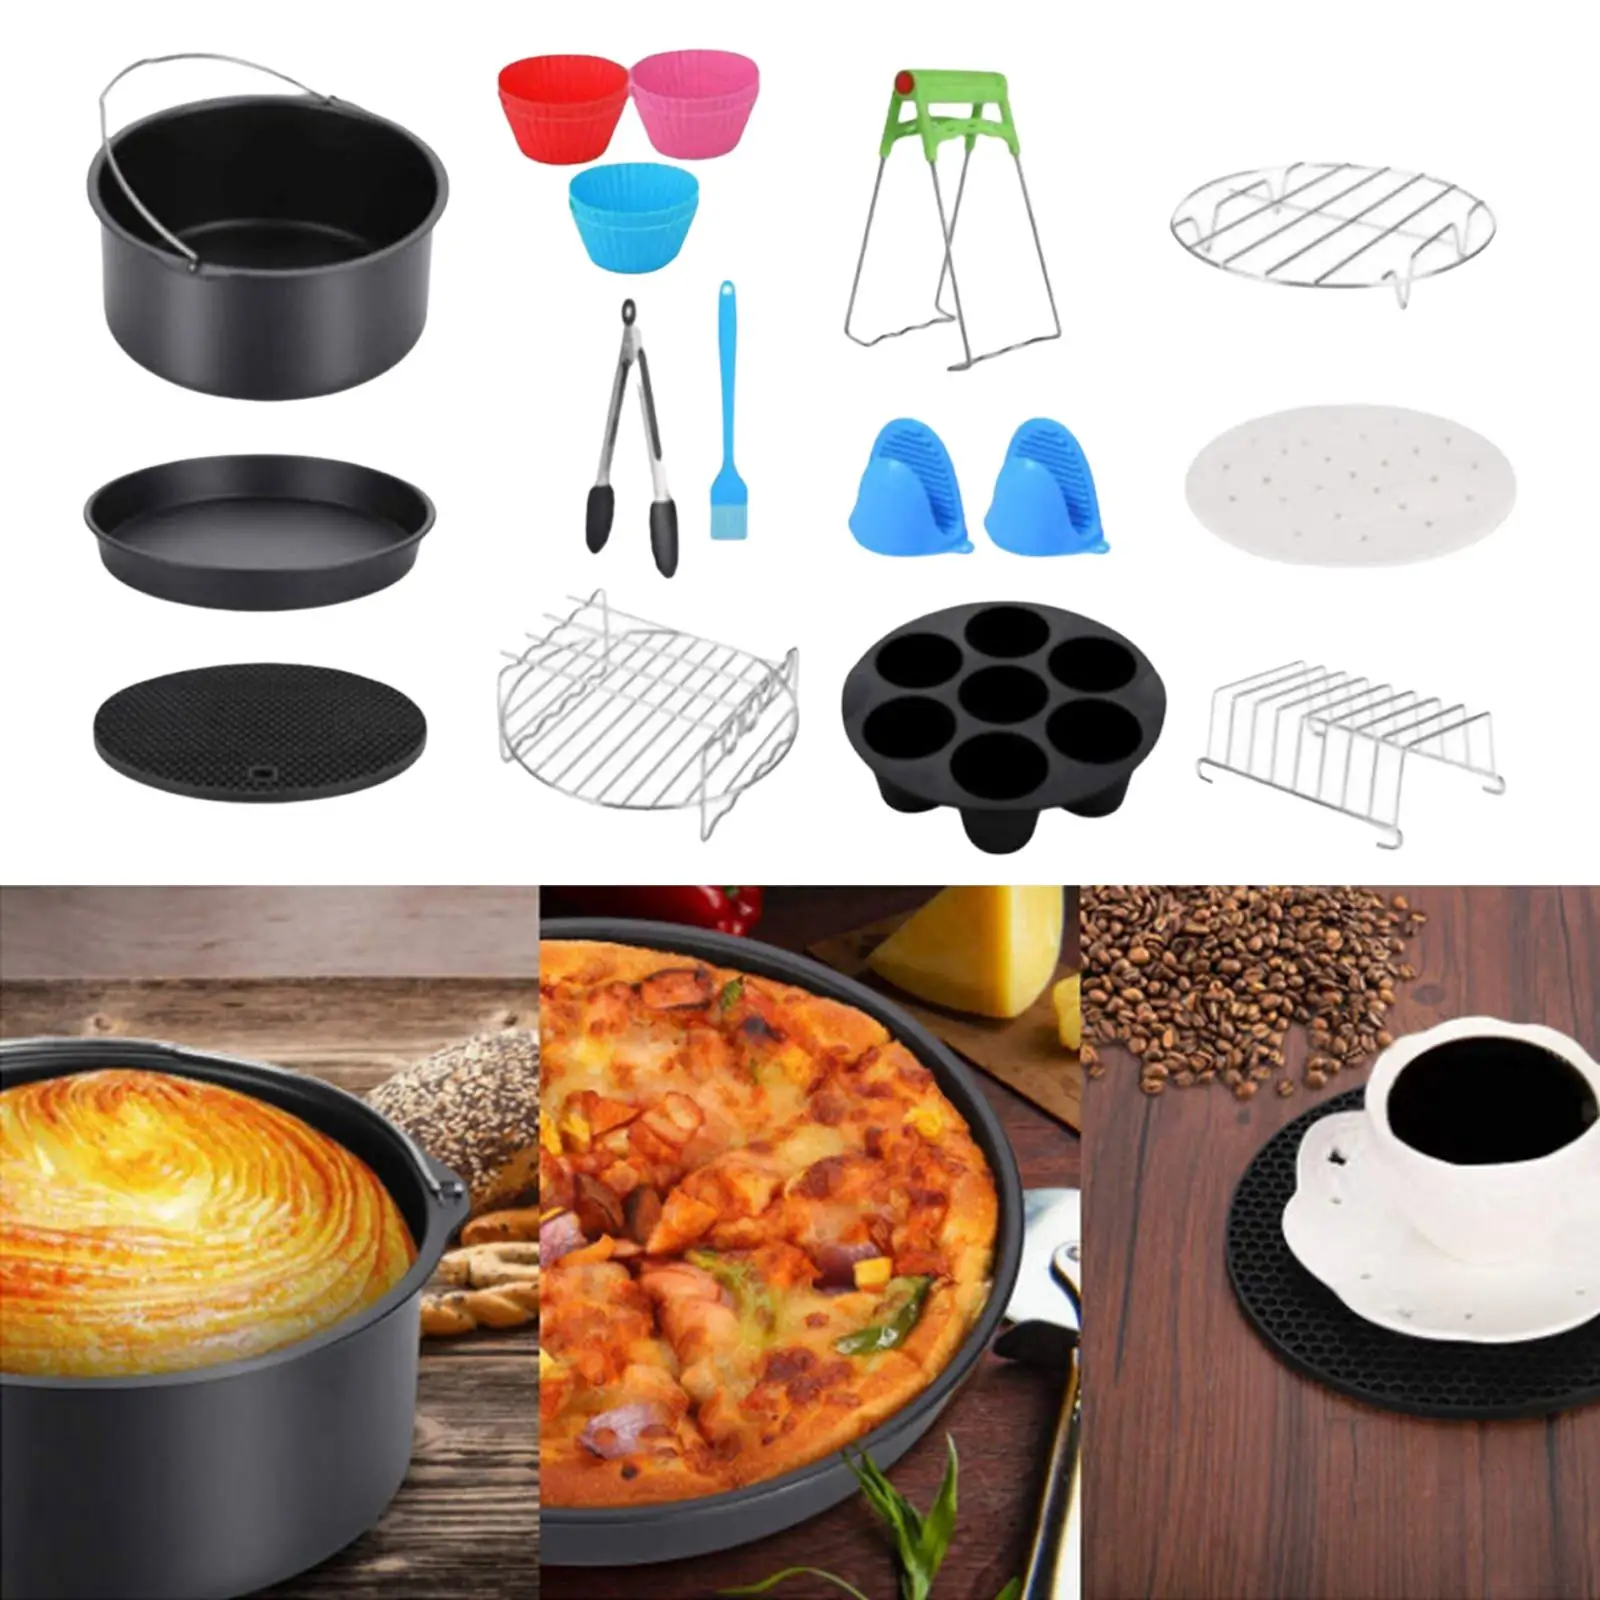 13Pcs 8 inch Air Fryer Accessories Set for 3.8 to 8Qt Food Grade Material